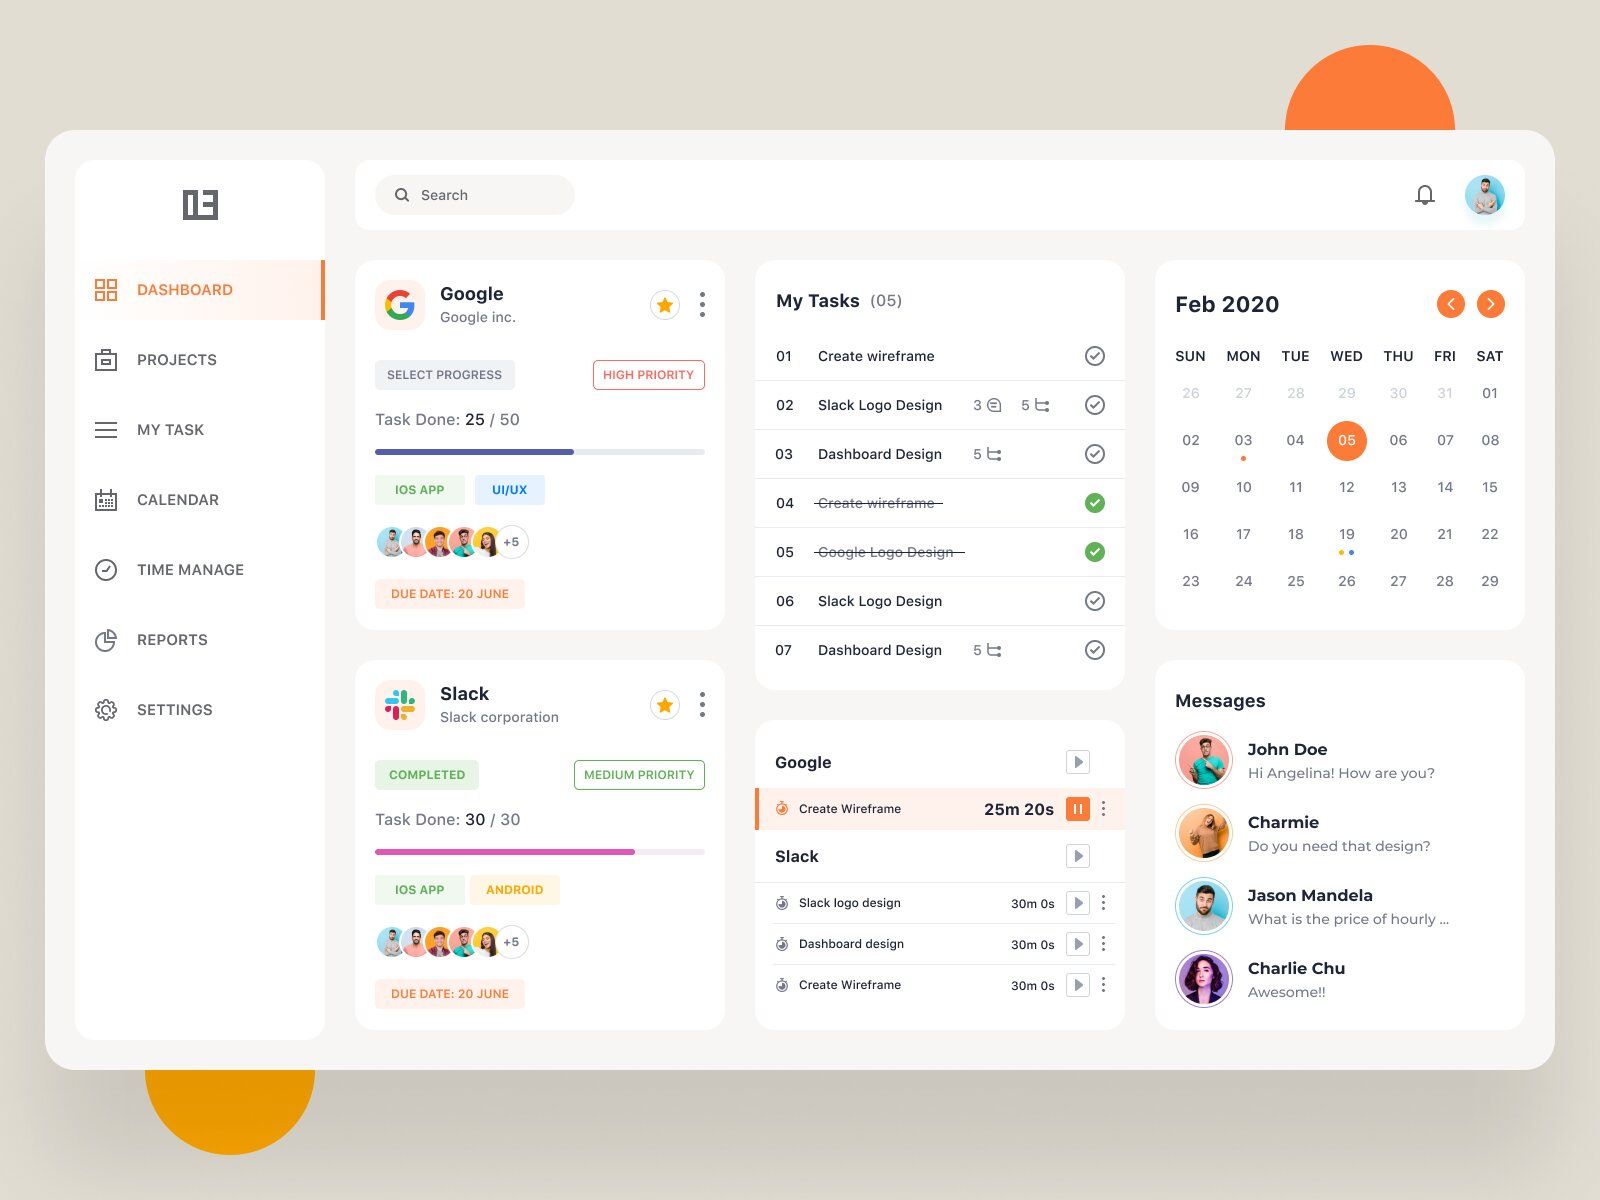 Project management software can include functionality of team management apps, tools for teams and users to manage tasks, etc. (*image by [Manoj Rajput](https://dribbble.com/manojrajput){ rel="nofollow" target="_blank" .default-md}*)